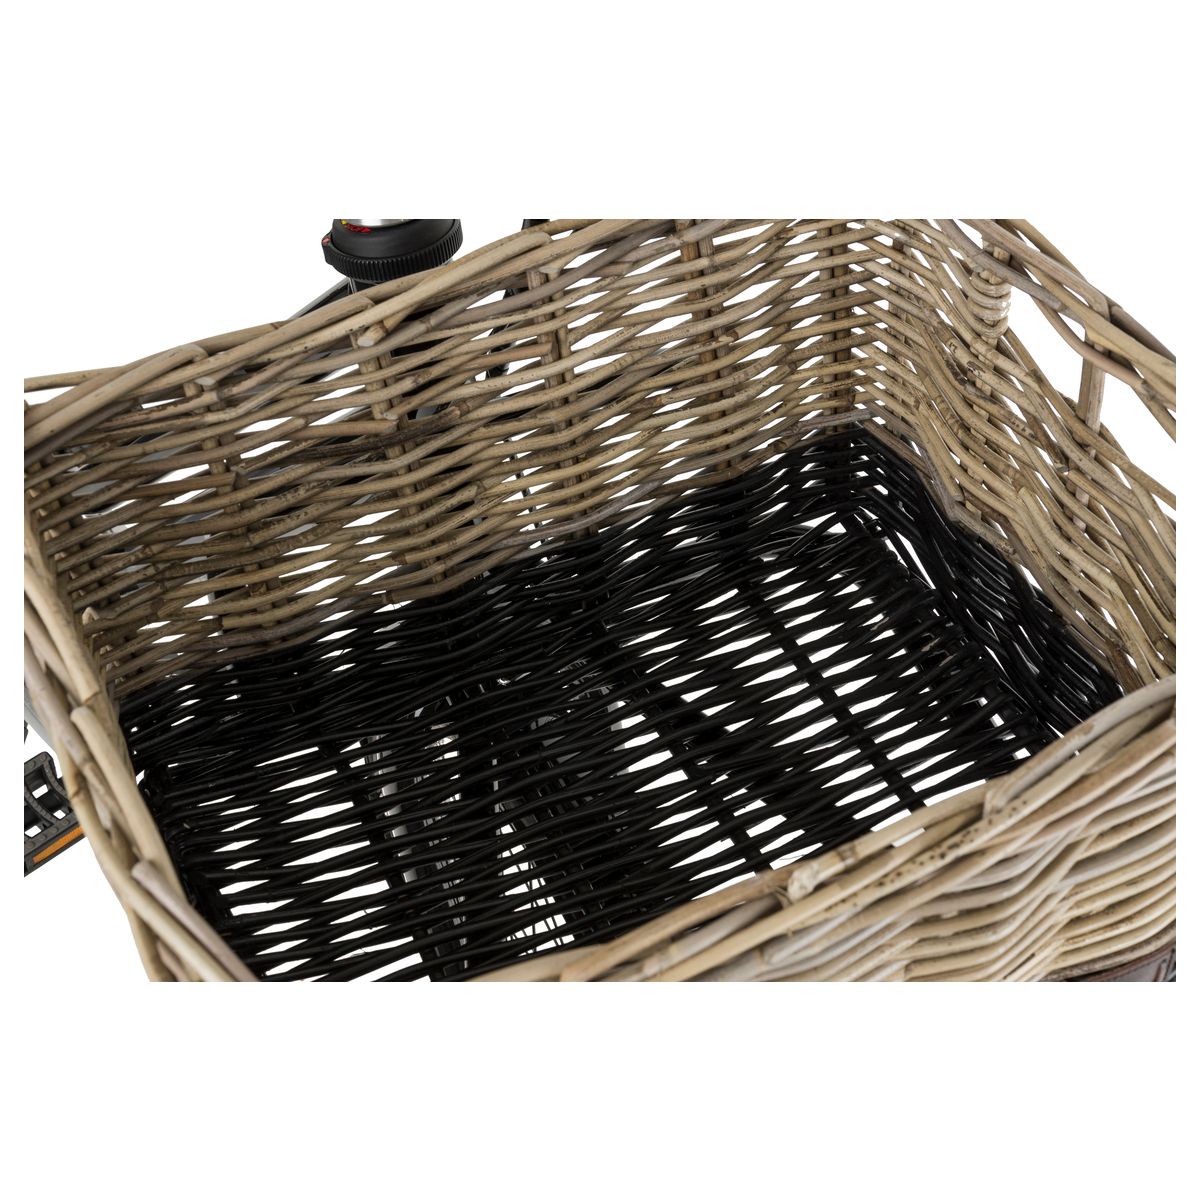 Fastrider Nero Rattan Bicycle basket fit example